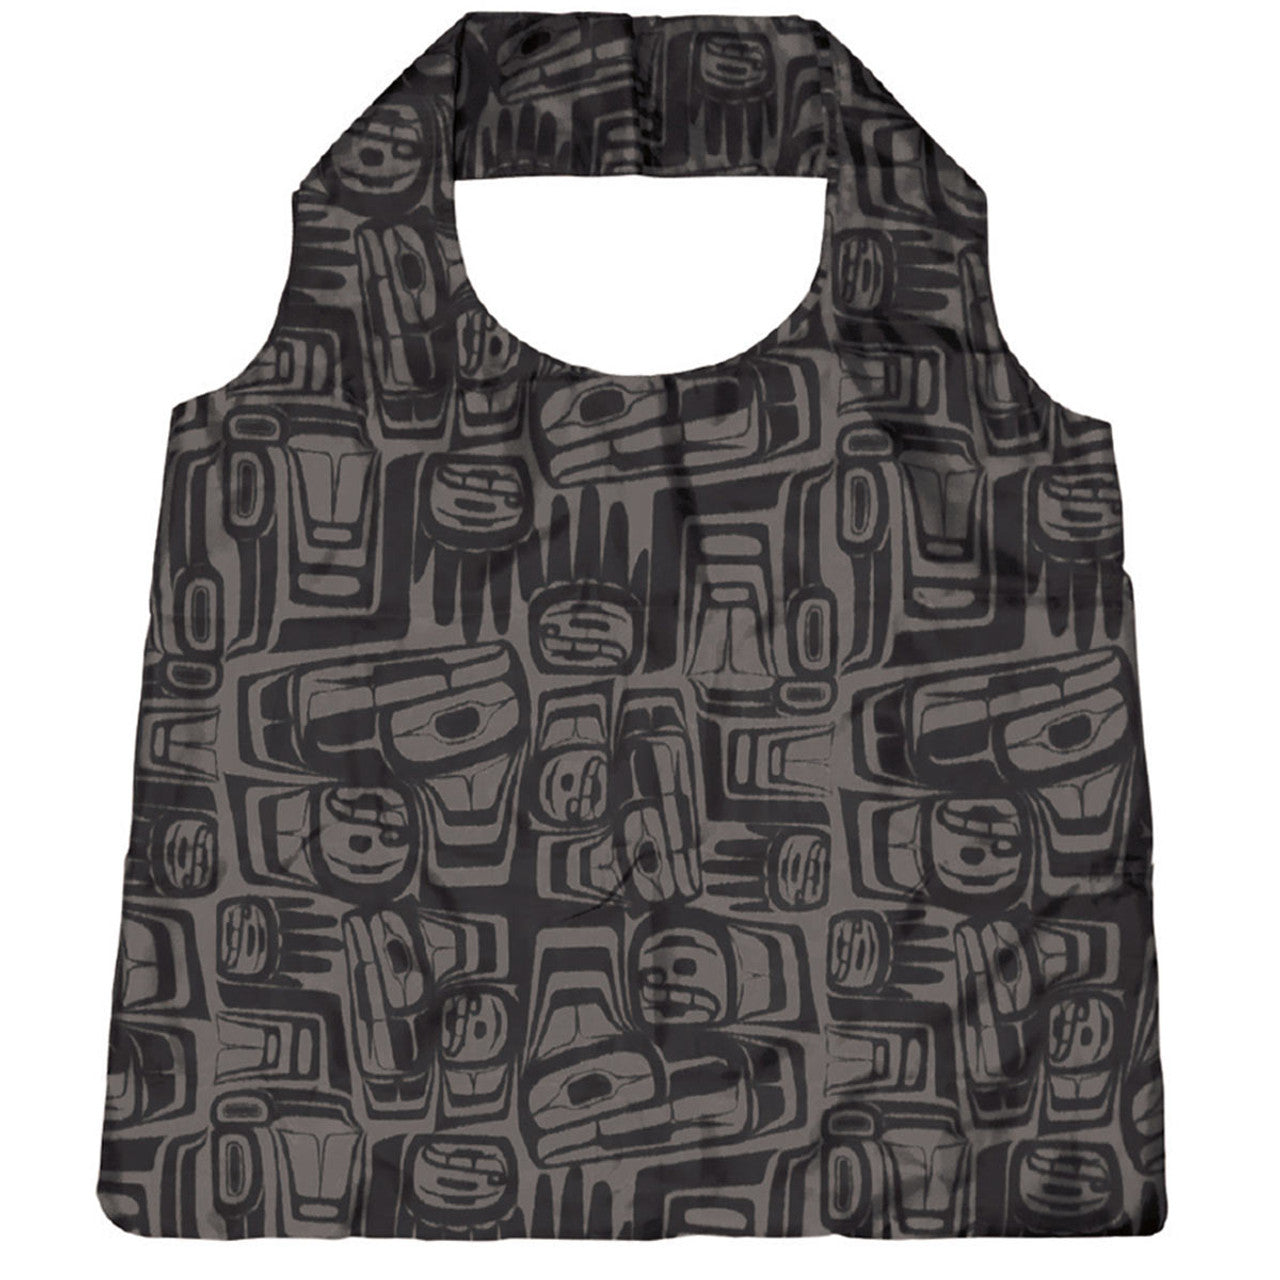 FOLDABLE SHOPPING BAGS - Ben Houstie Eagle Crest Black - FBAG16 - House of Himwitsa Native Art Gallery and Gifts